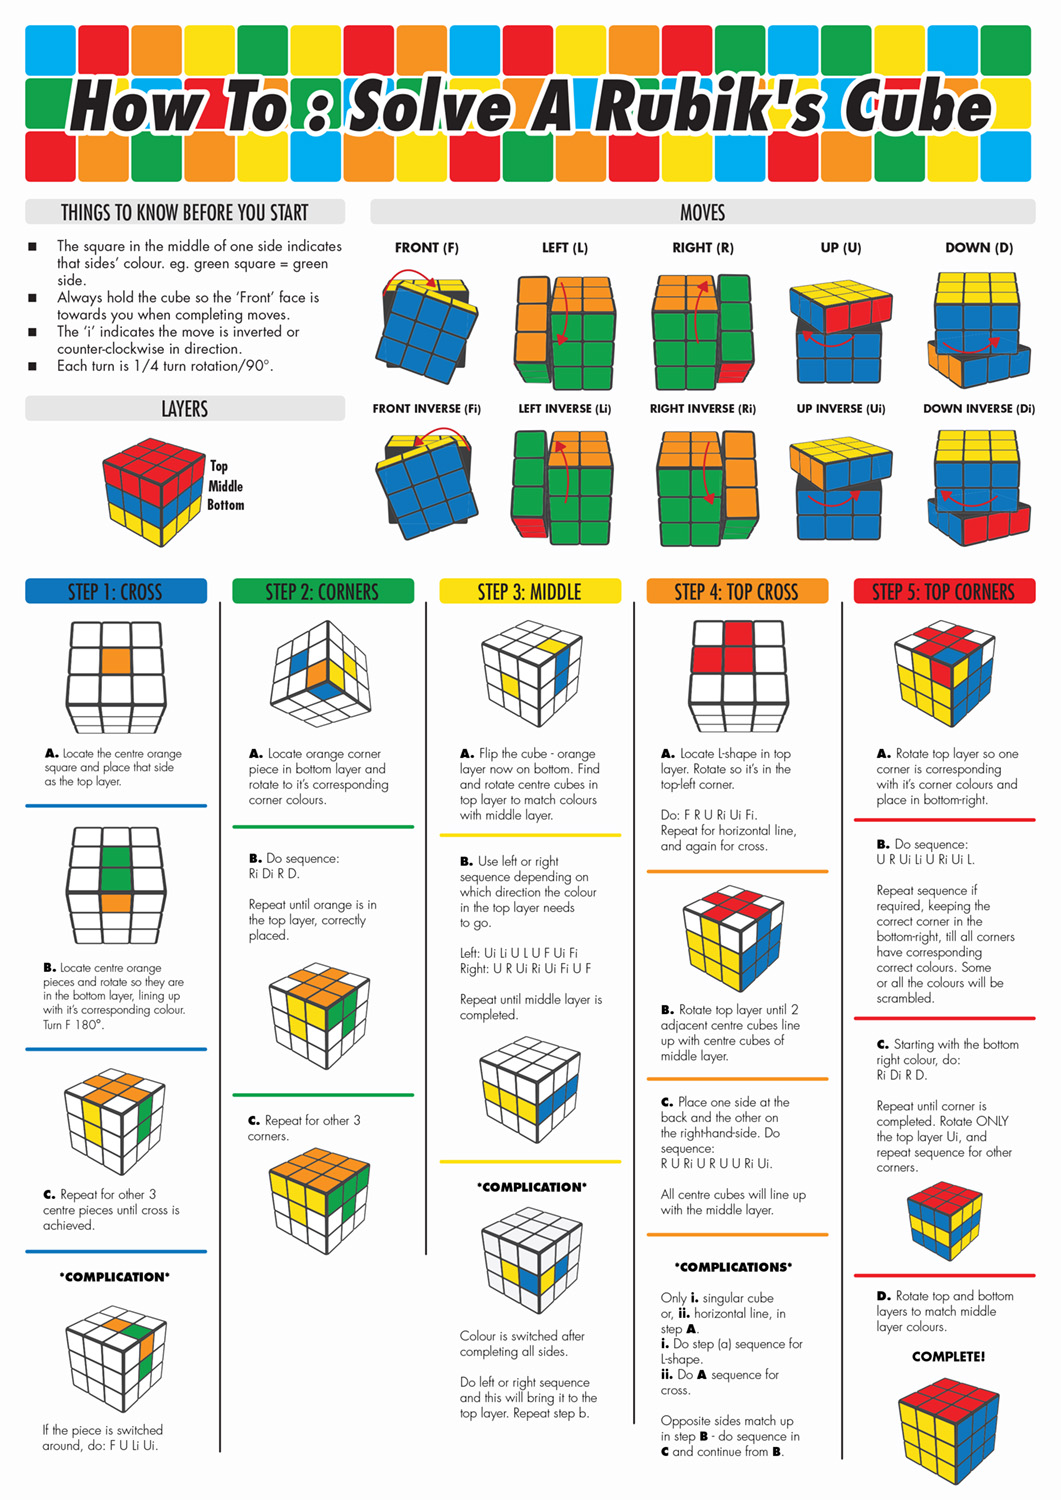 How To Do A Rubik's Cube